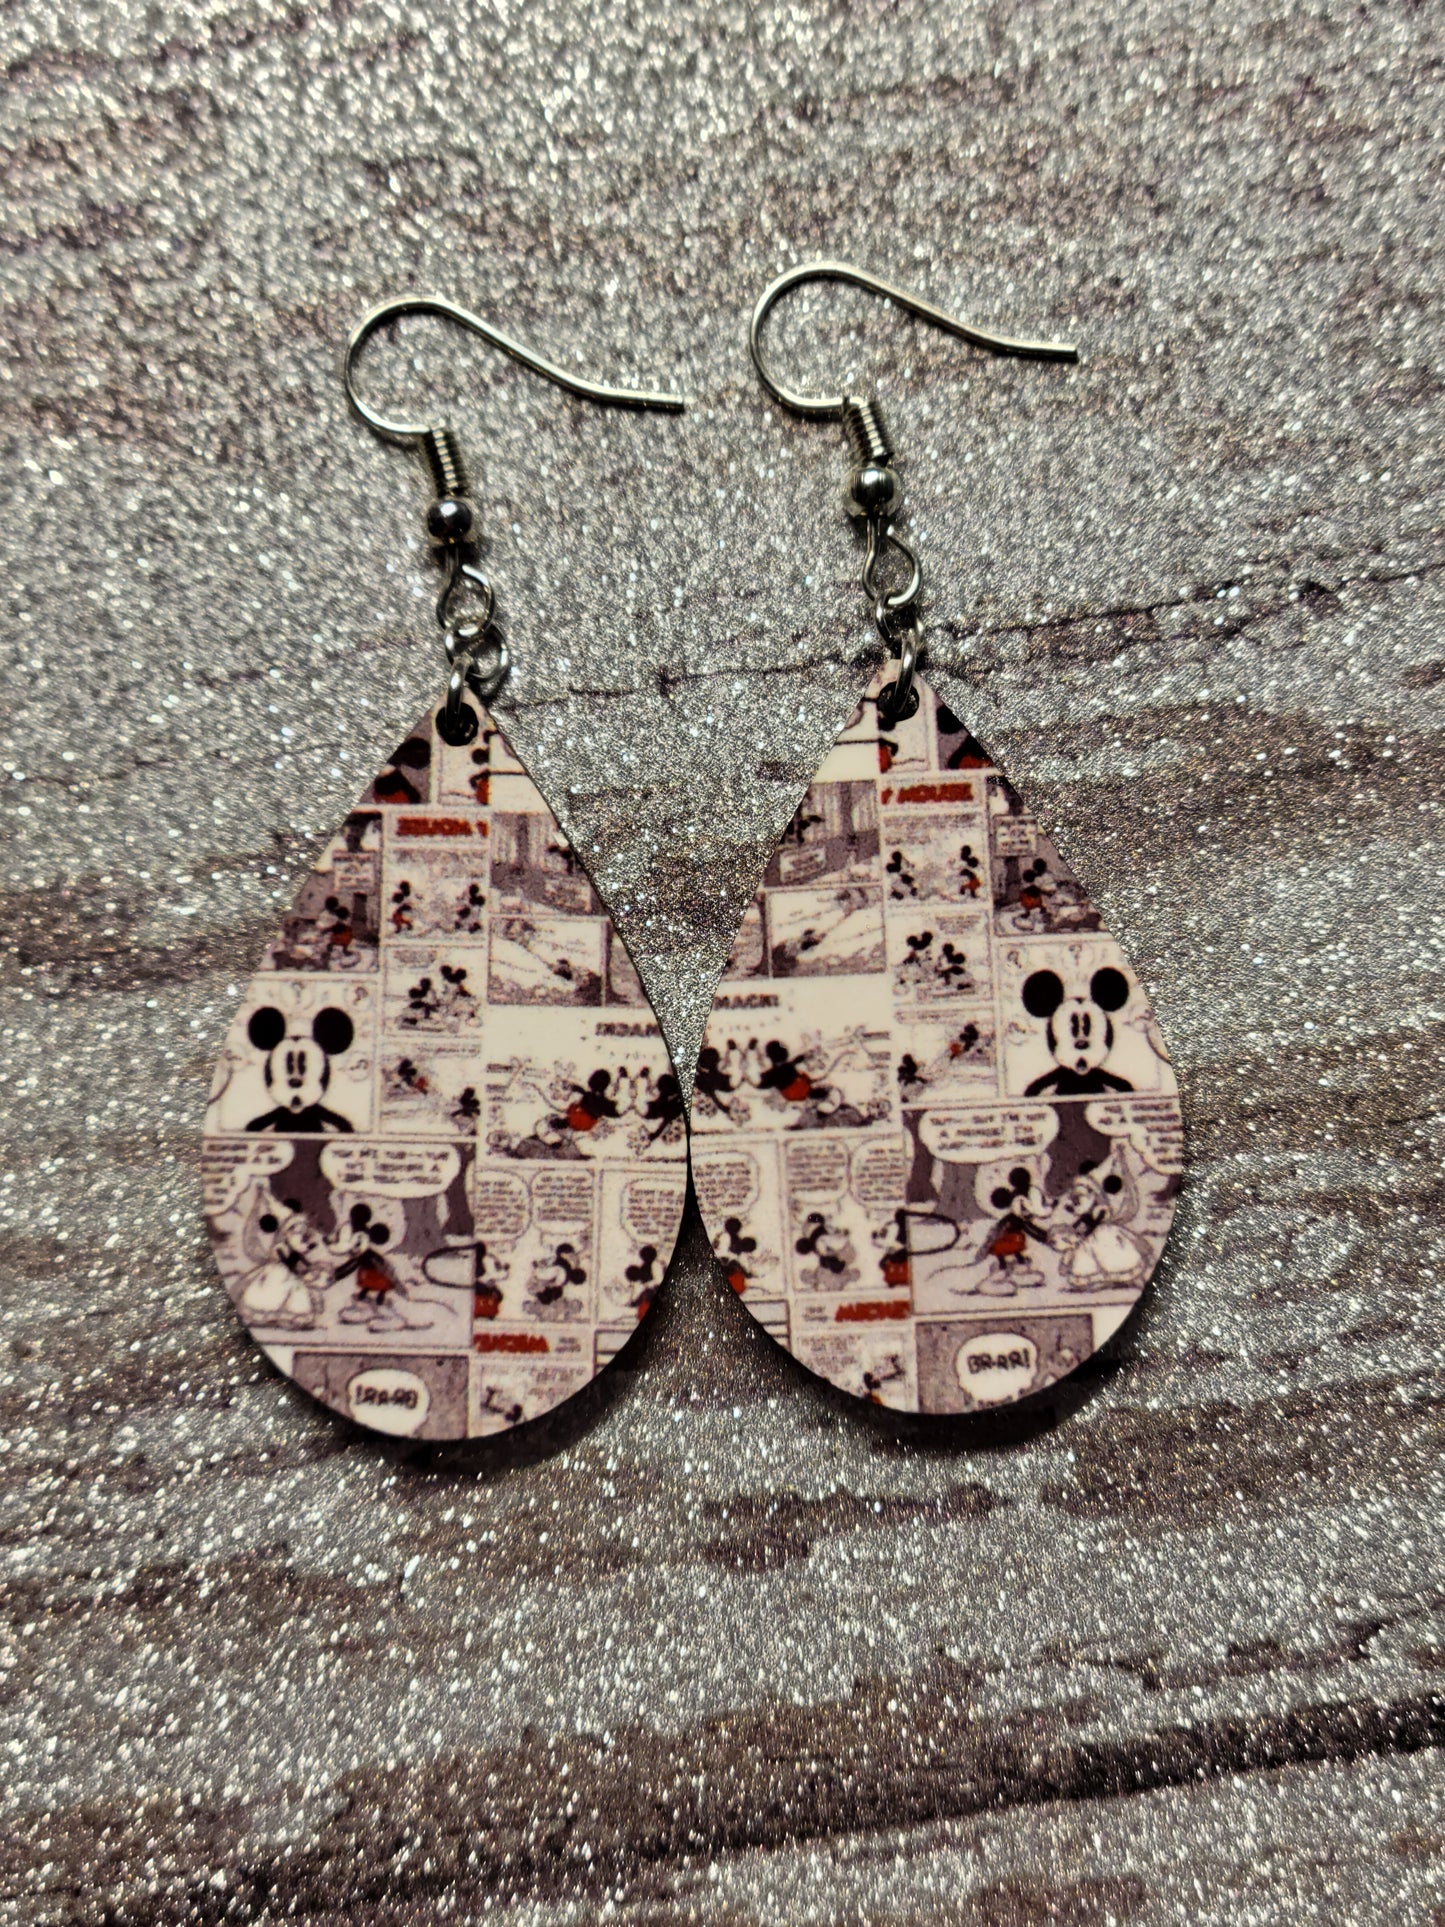 Mickey and Minnie Valentine Earrings